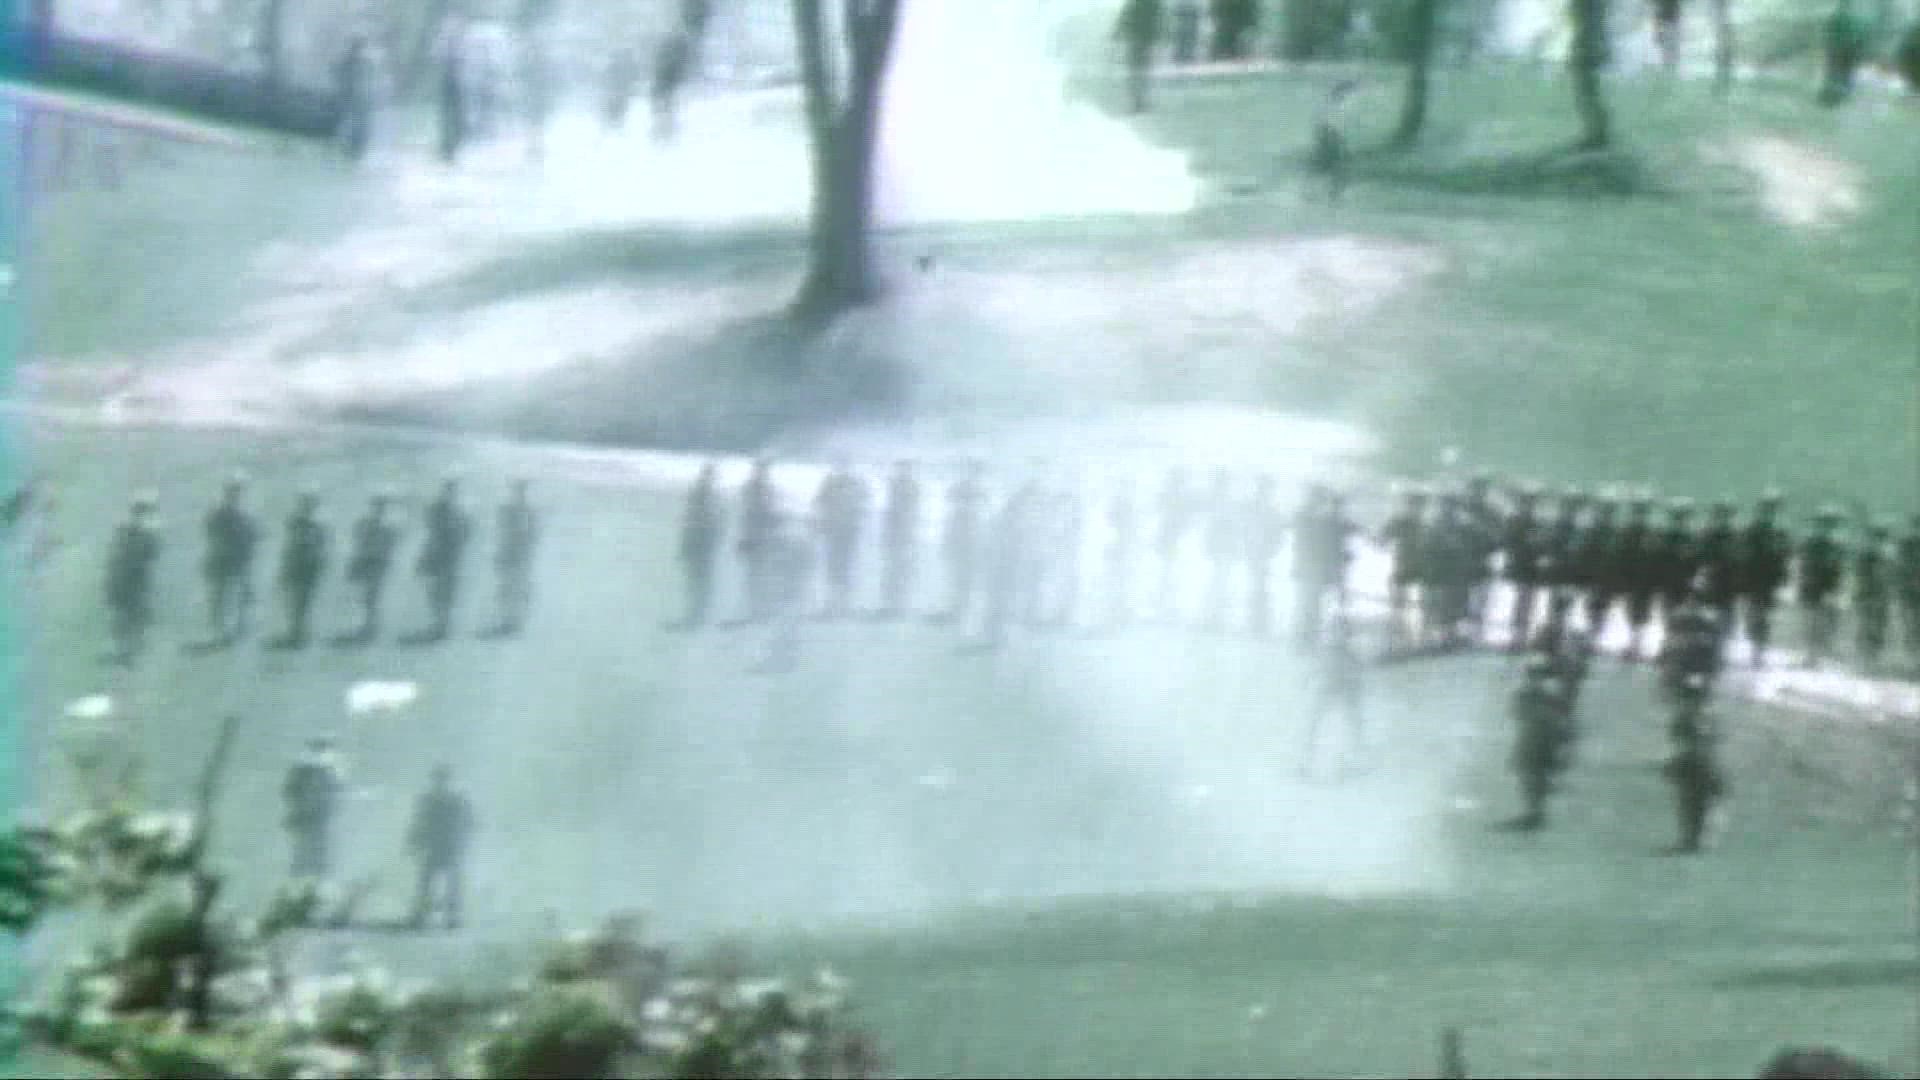 Four students were shot dead by the Ohio National Guard while protesting the Vietnam War. Nine others were injured.